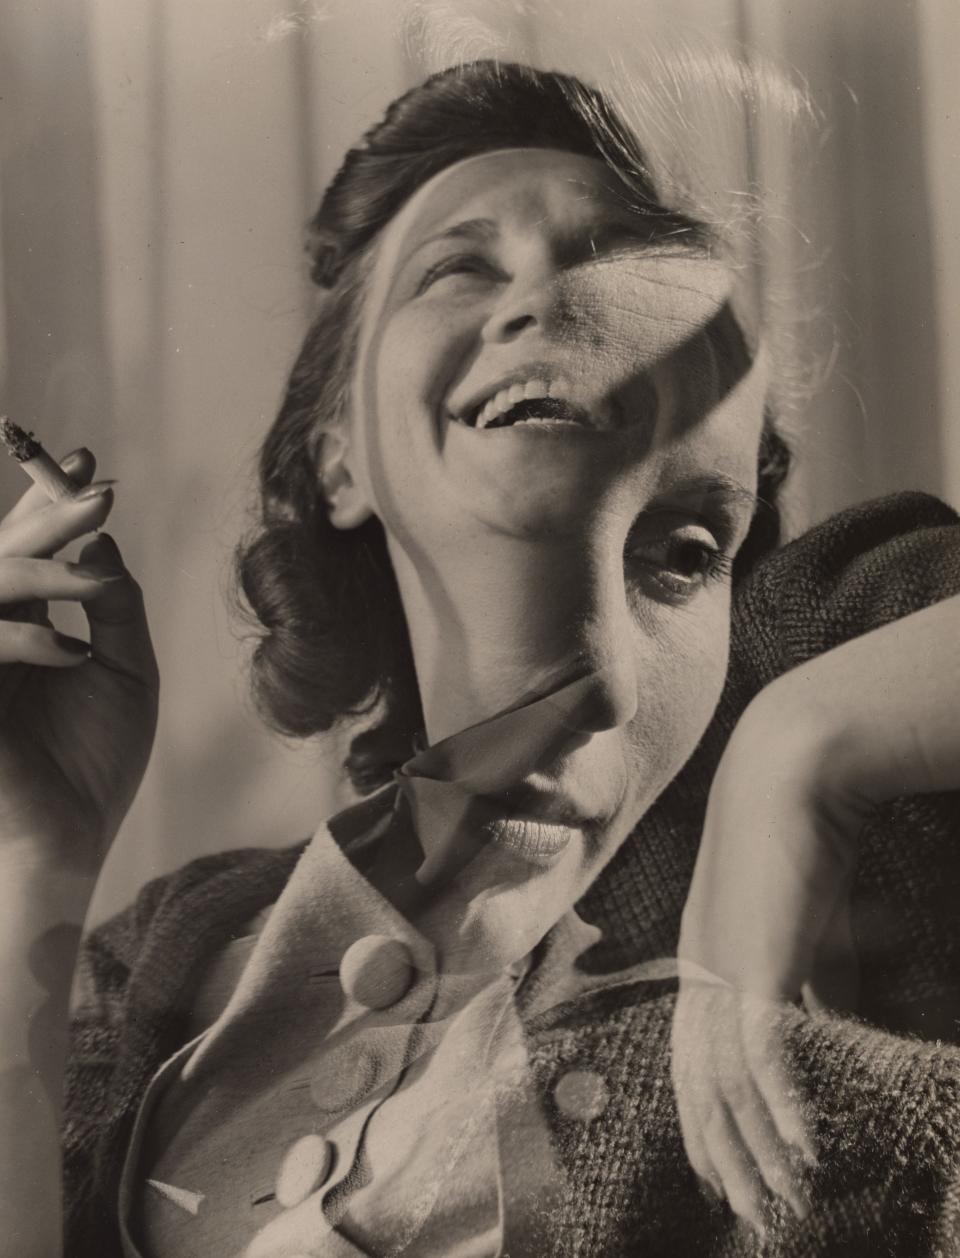 This image of Judy Glickman Lauder's mother, Louise Weinstein Ellis, captured by Glickman Lauder's father Irving Bennett Ellis is featured in "Presence: The Photography Collection of Judy Glickman Lauder."